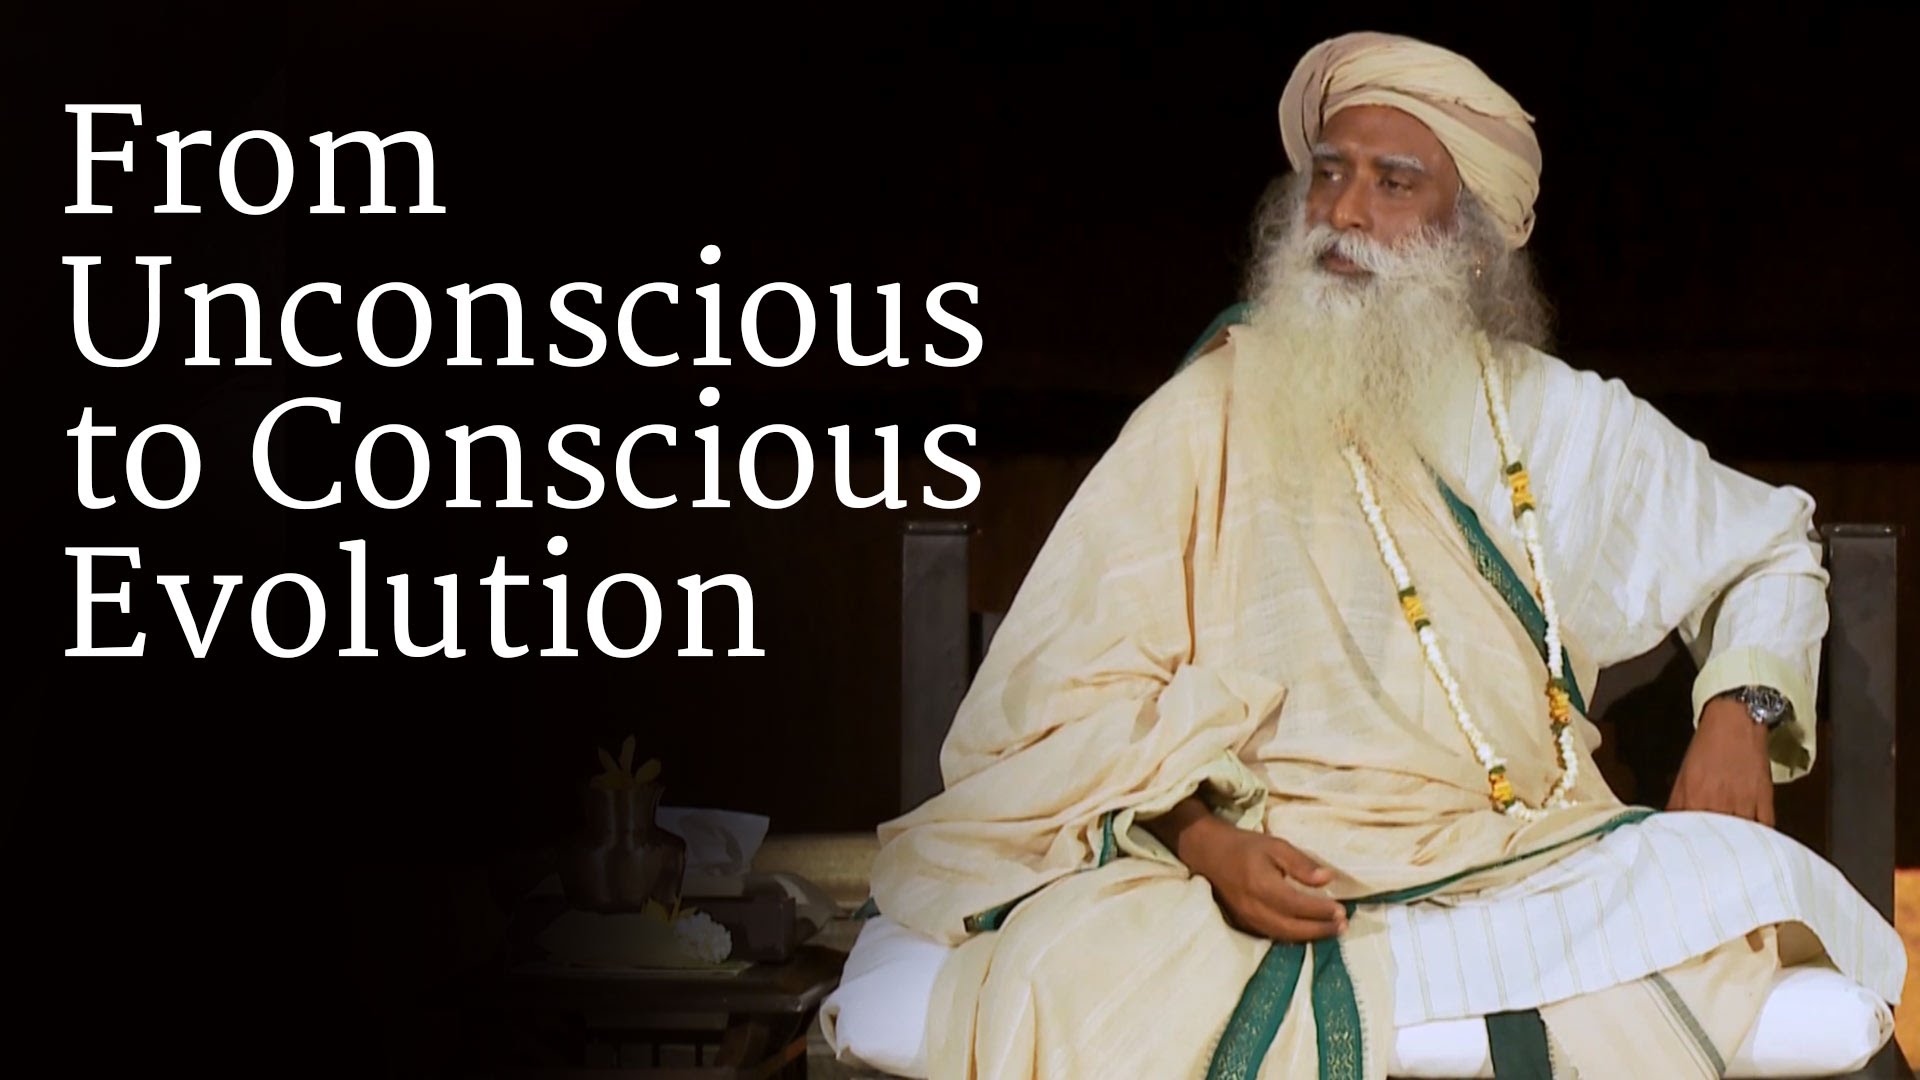 From Unconscious to Conscious Evolution